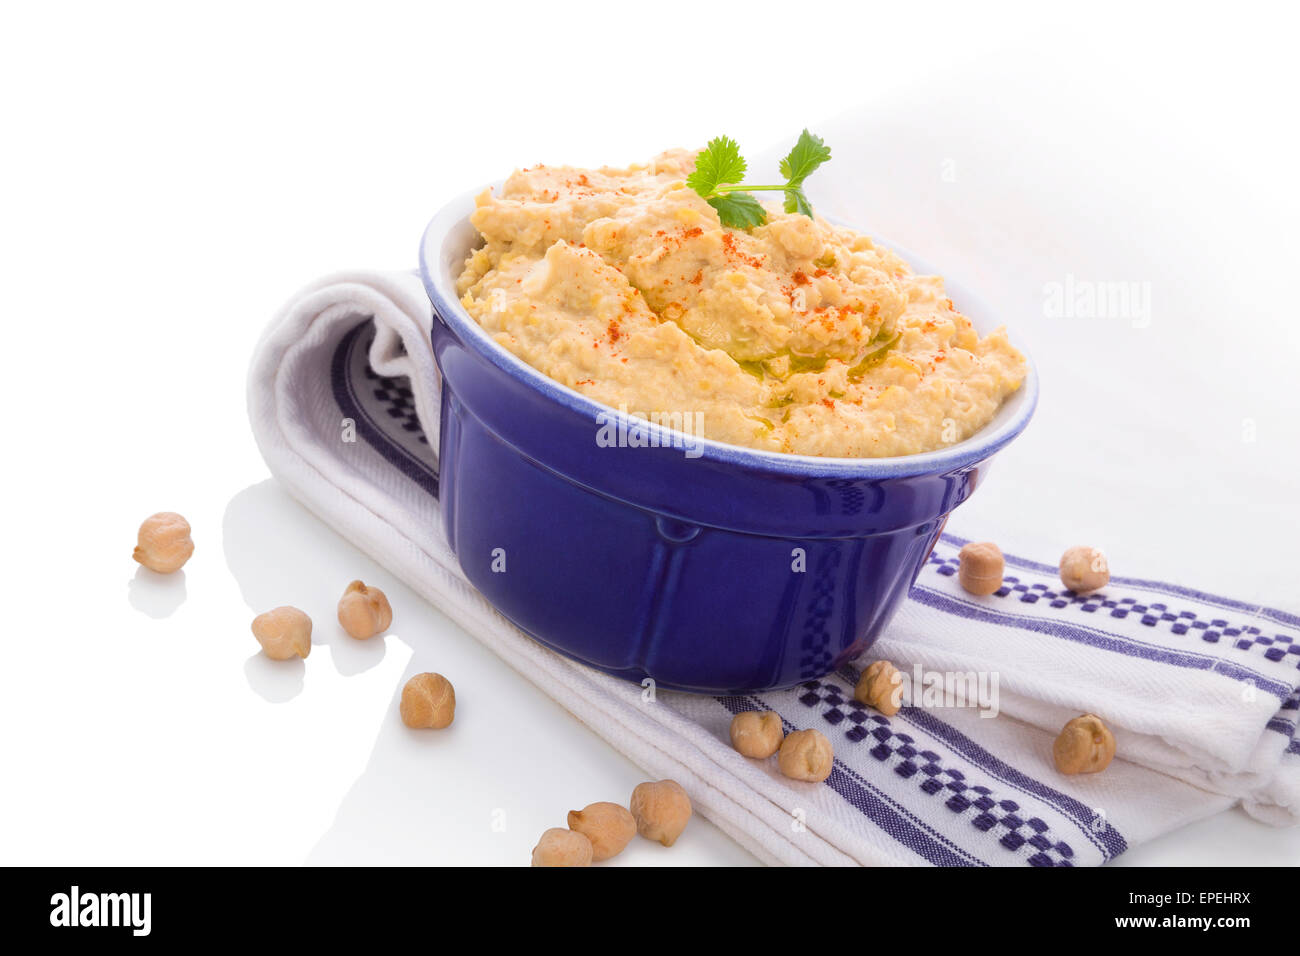 Delicious hummus in ceramic pot on white and blue table cloth isolated on white background. Traditional eastern eating. Stock Photo